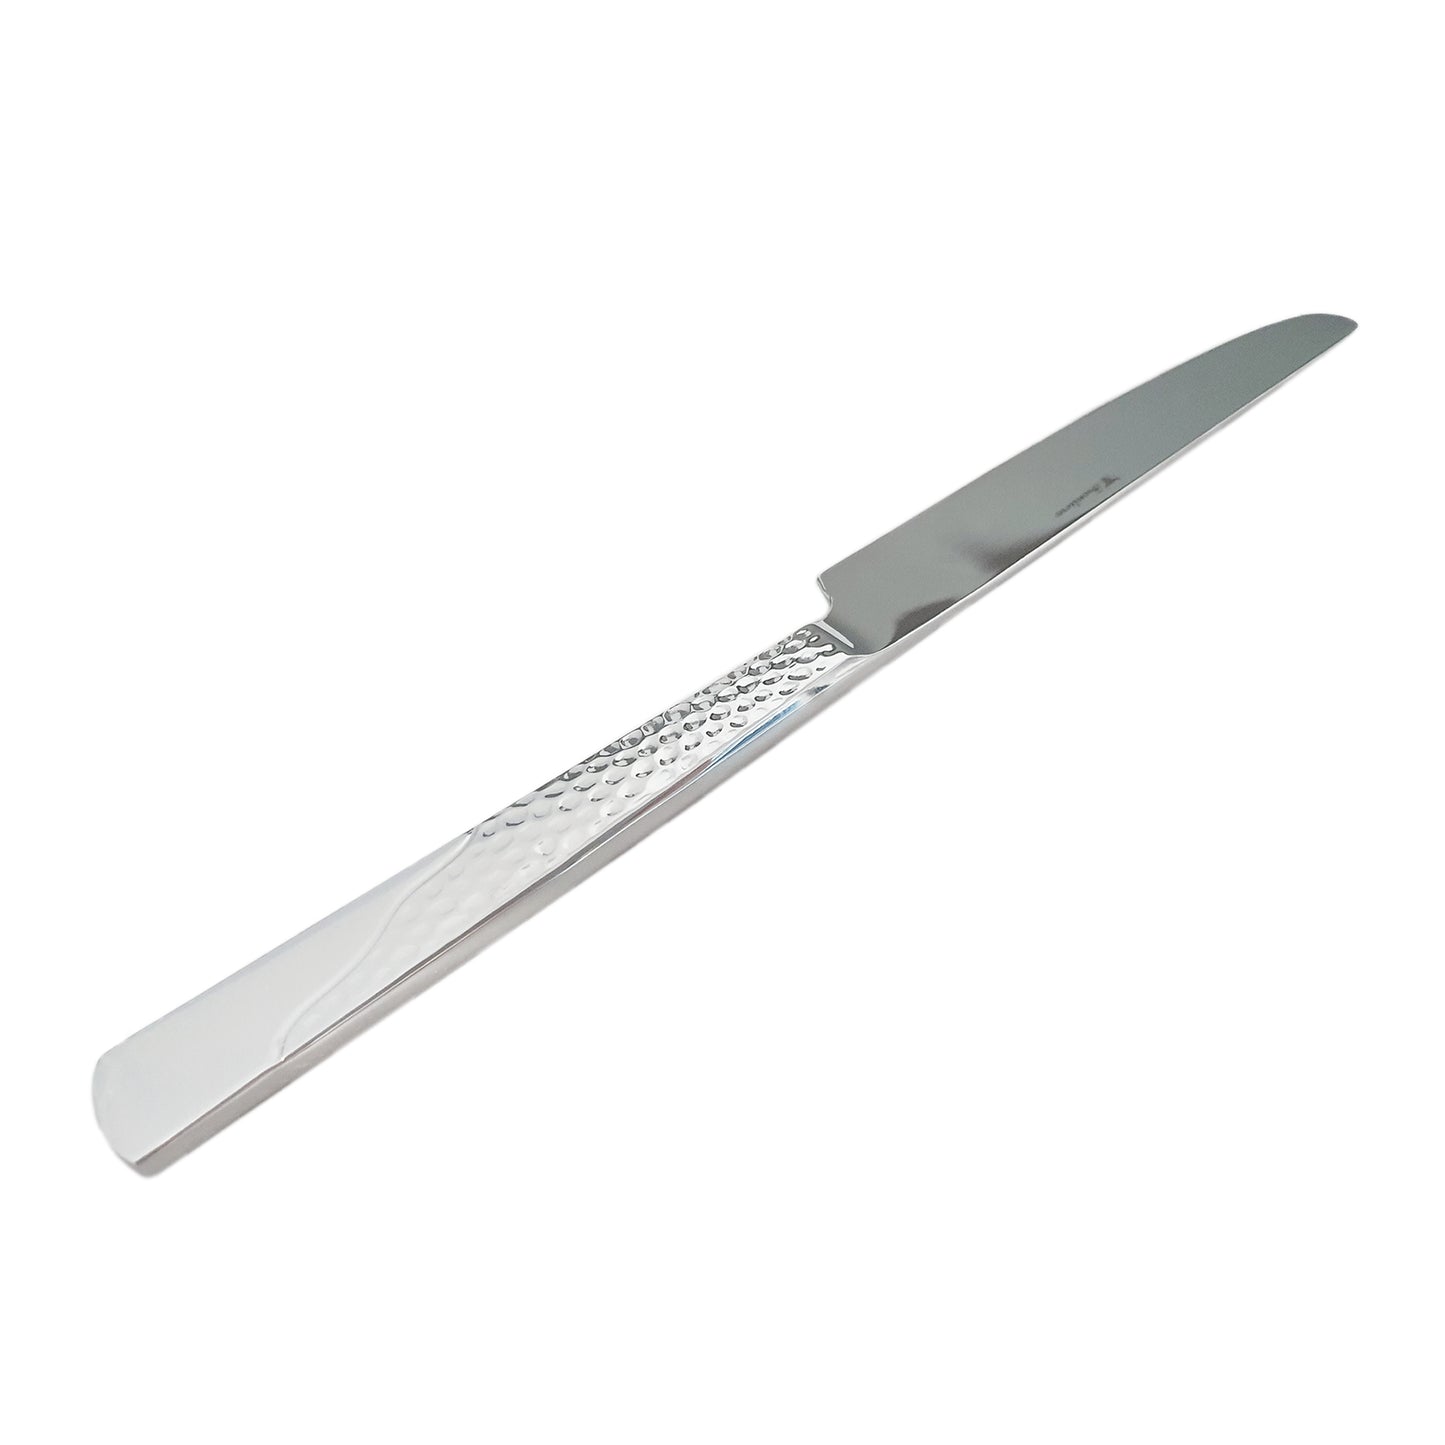 Humming 4-Piece Table Knife 8.9" (225mm)